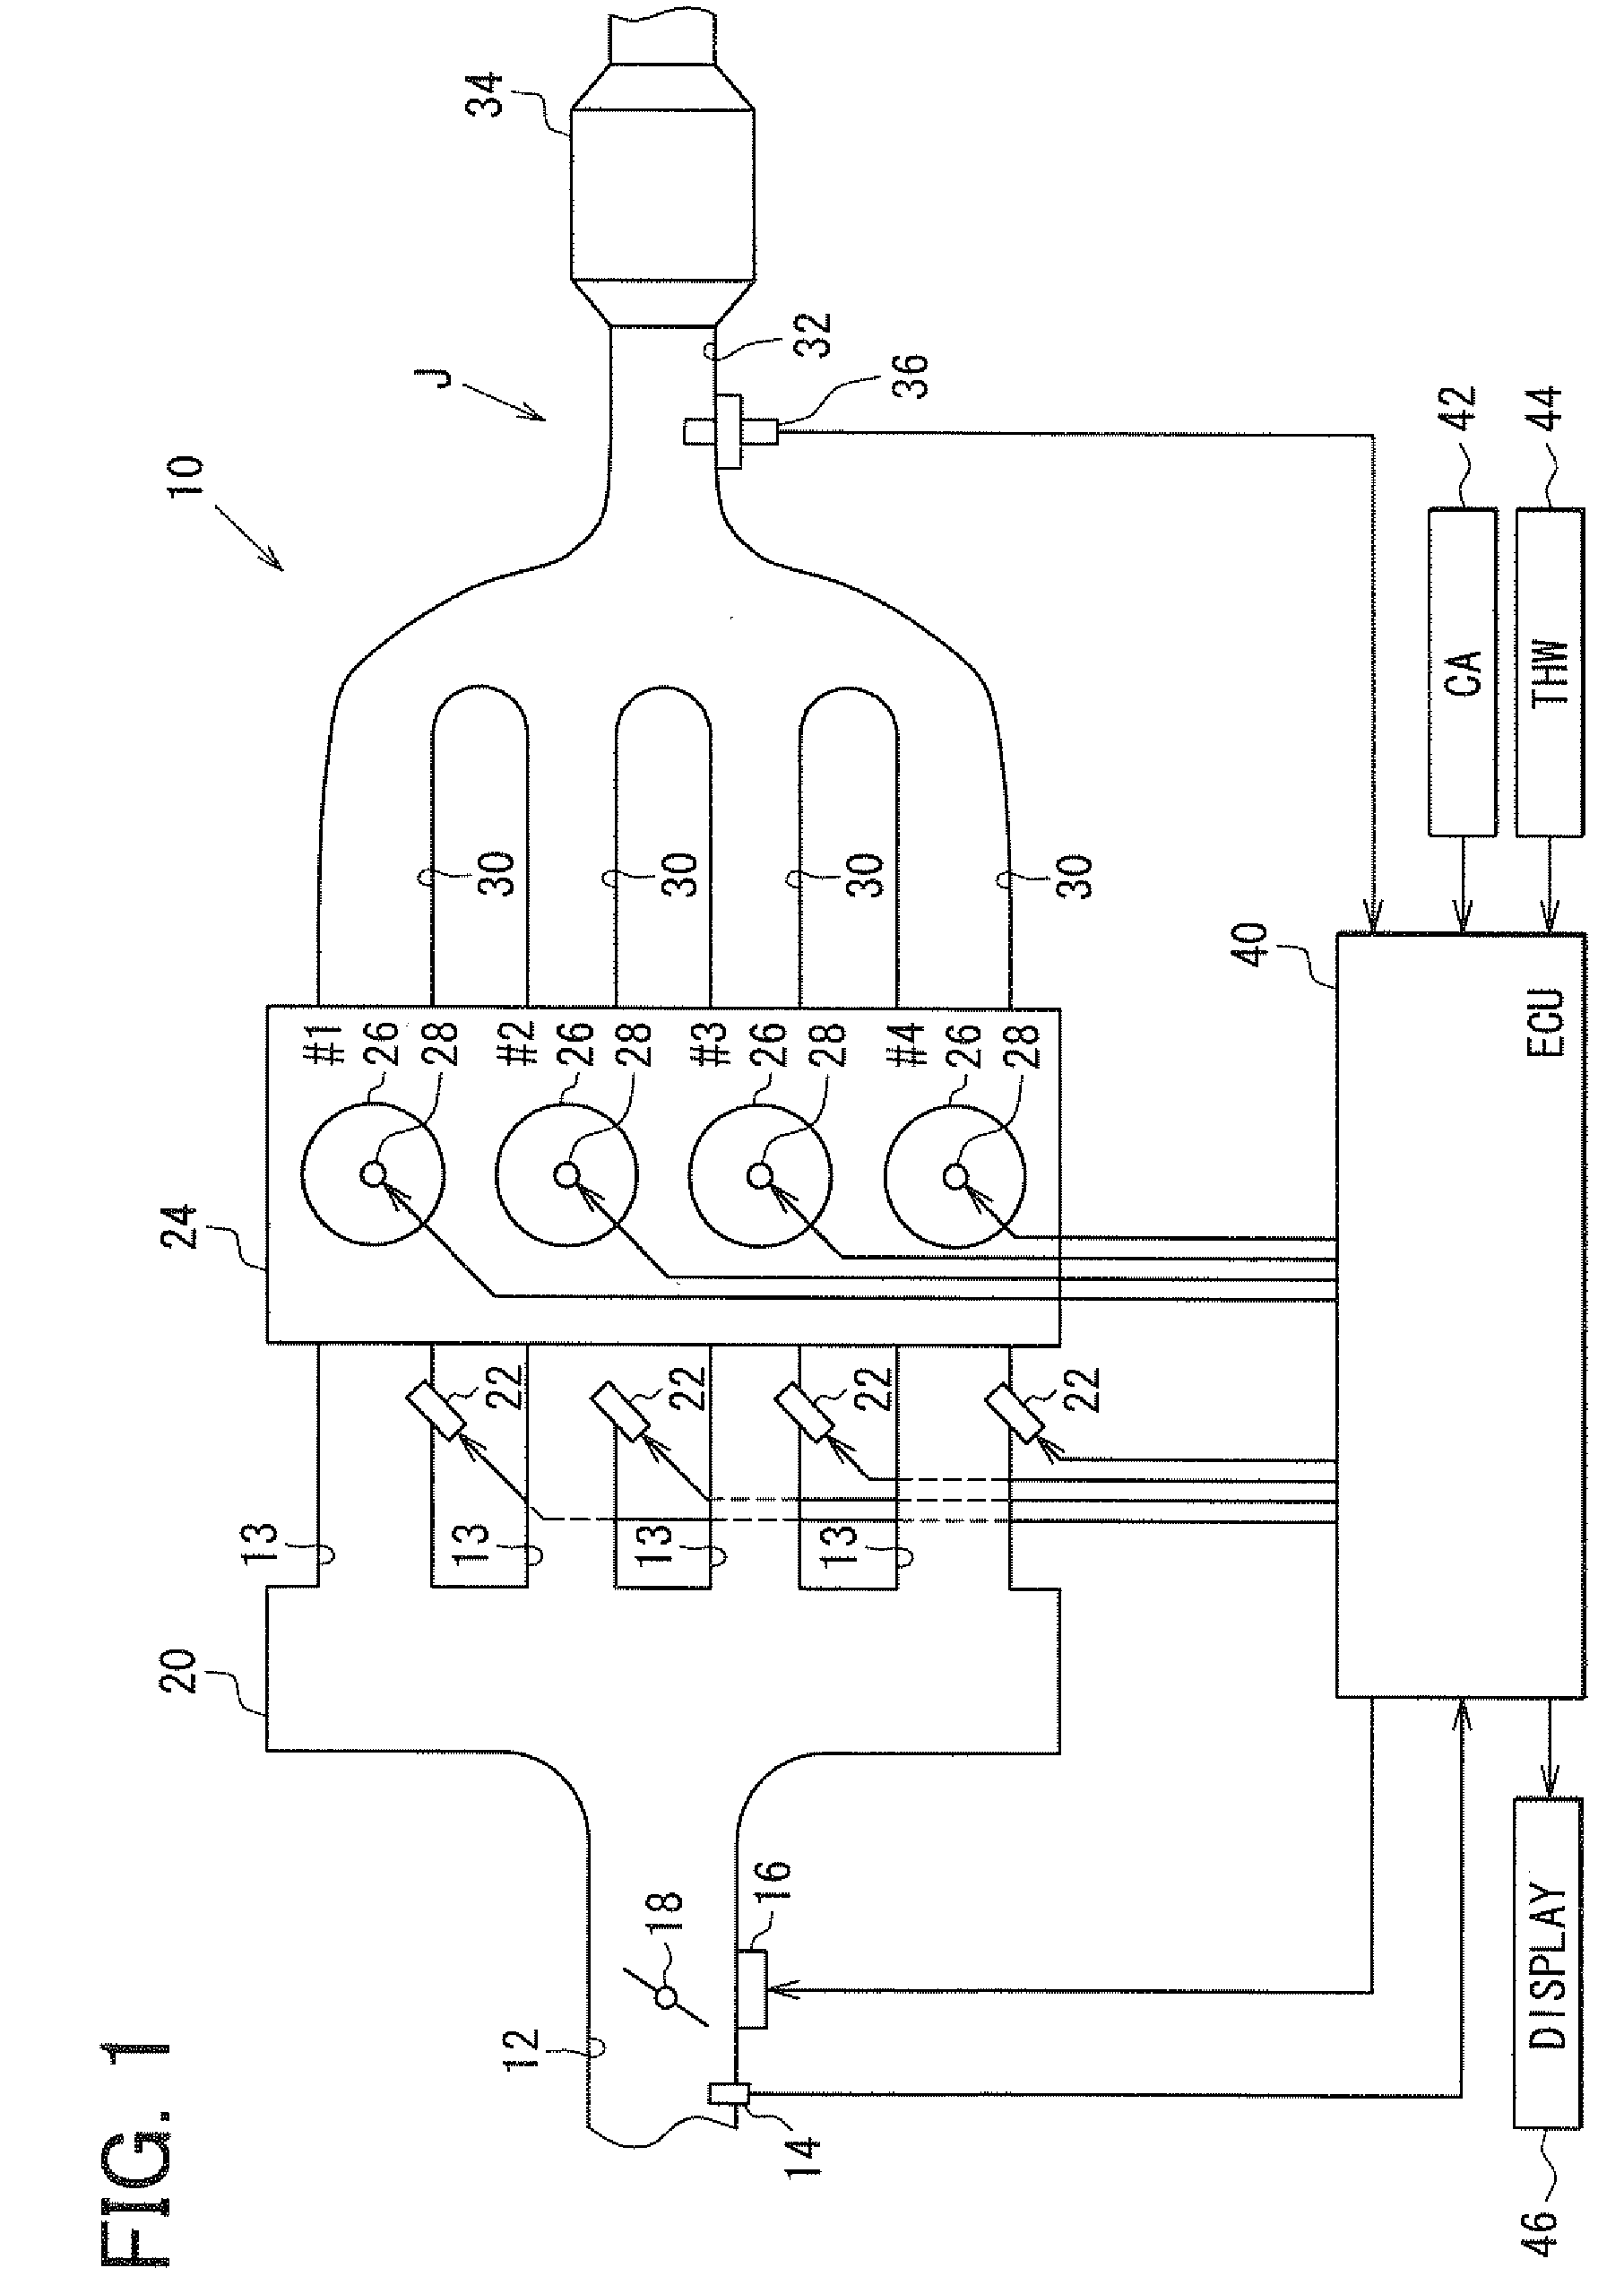 Abnormality diagnosis device and control system for internal combustion engine